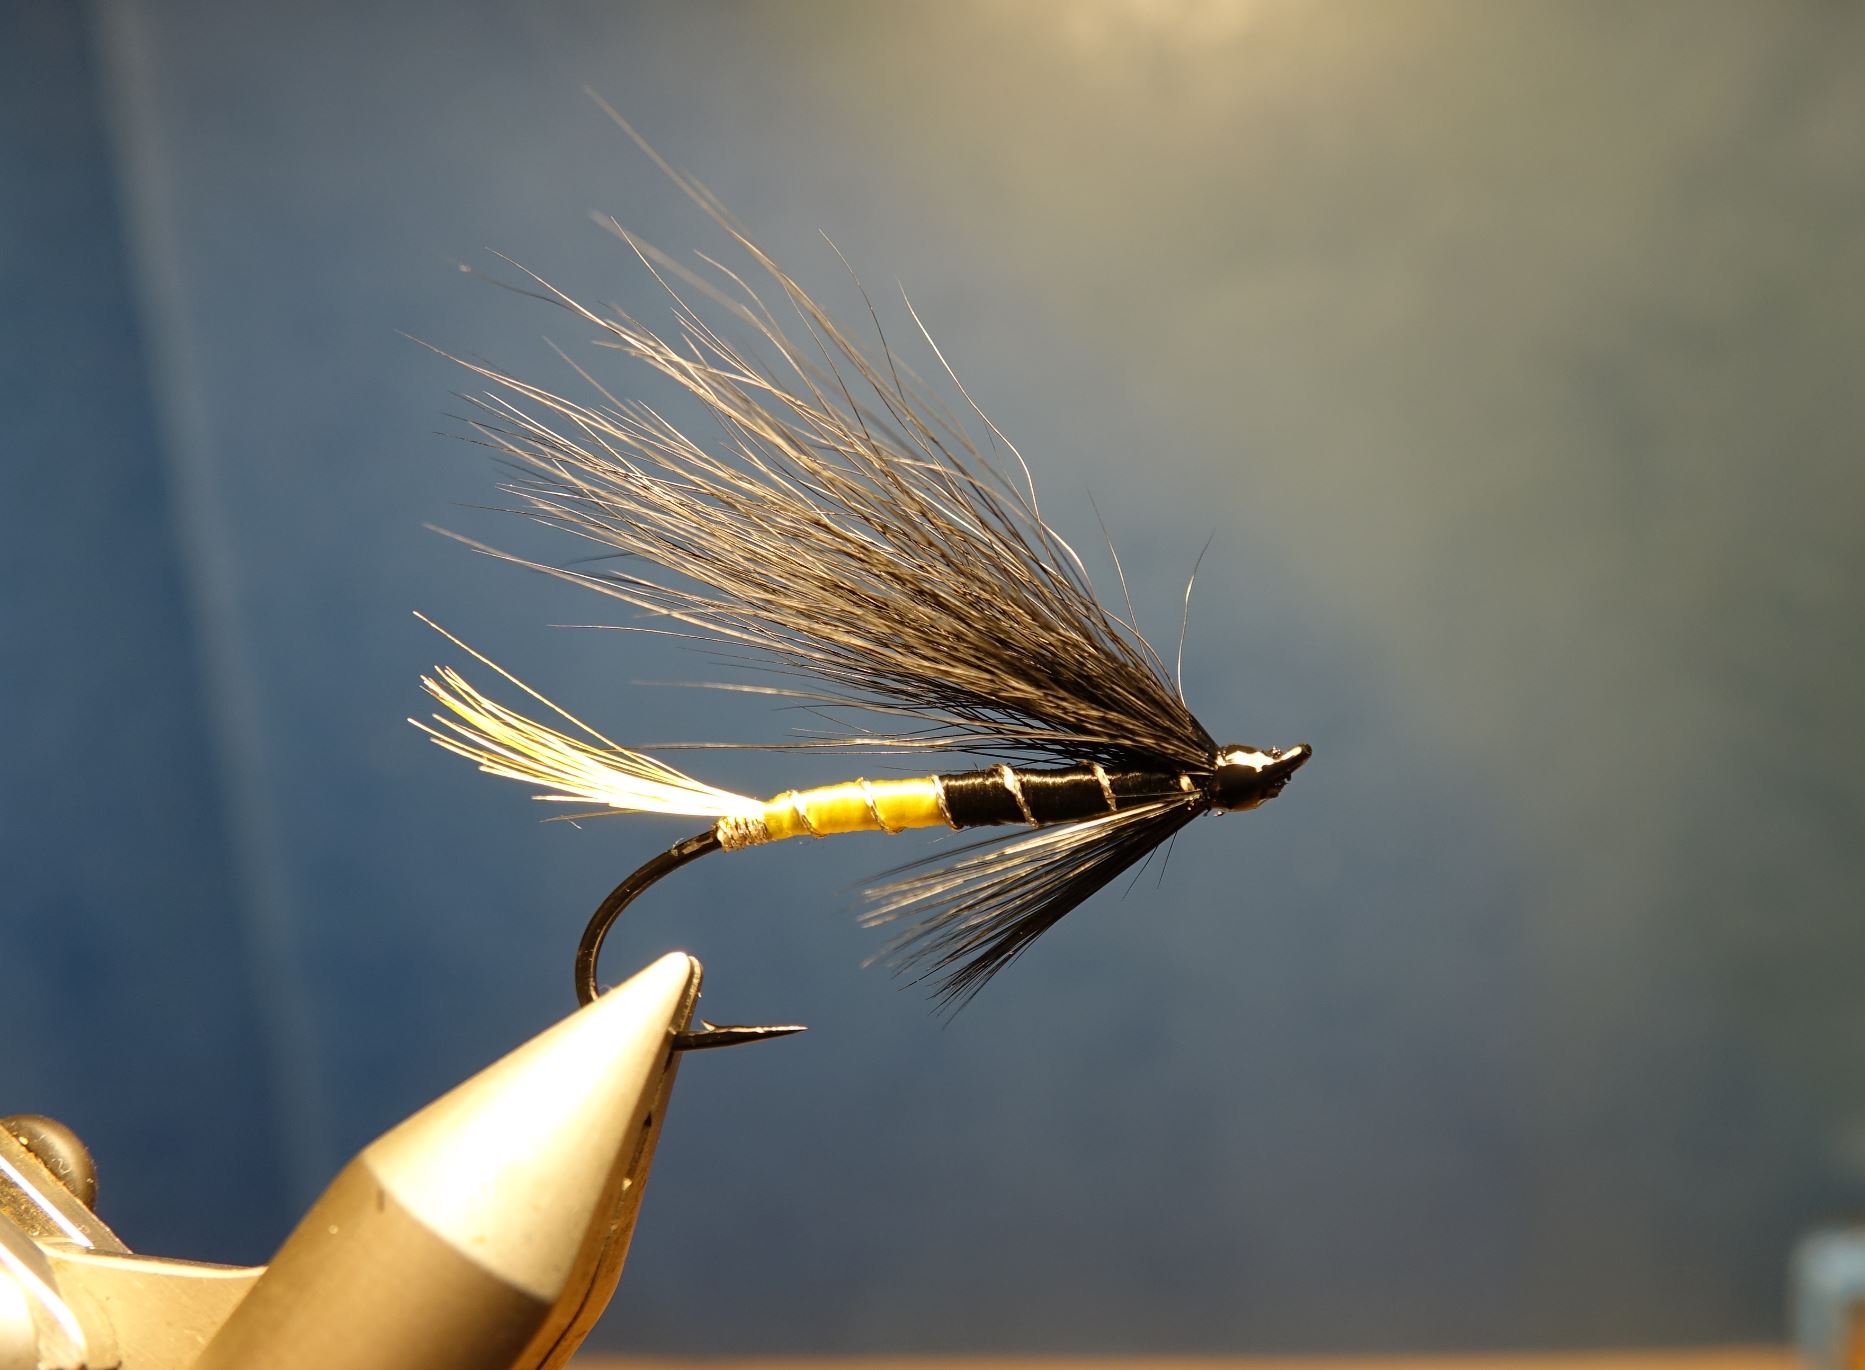 Black maria mouche fly salmon saumon fly-tying eclosion